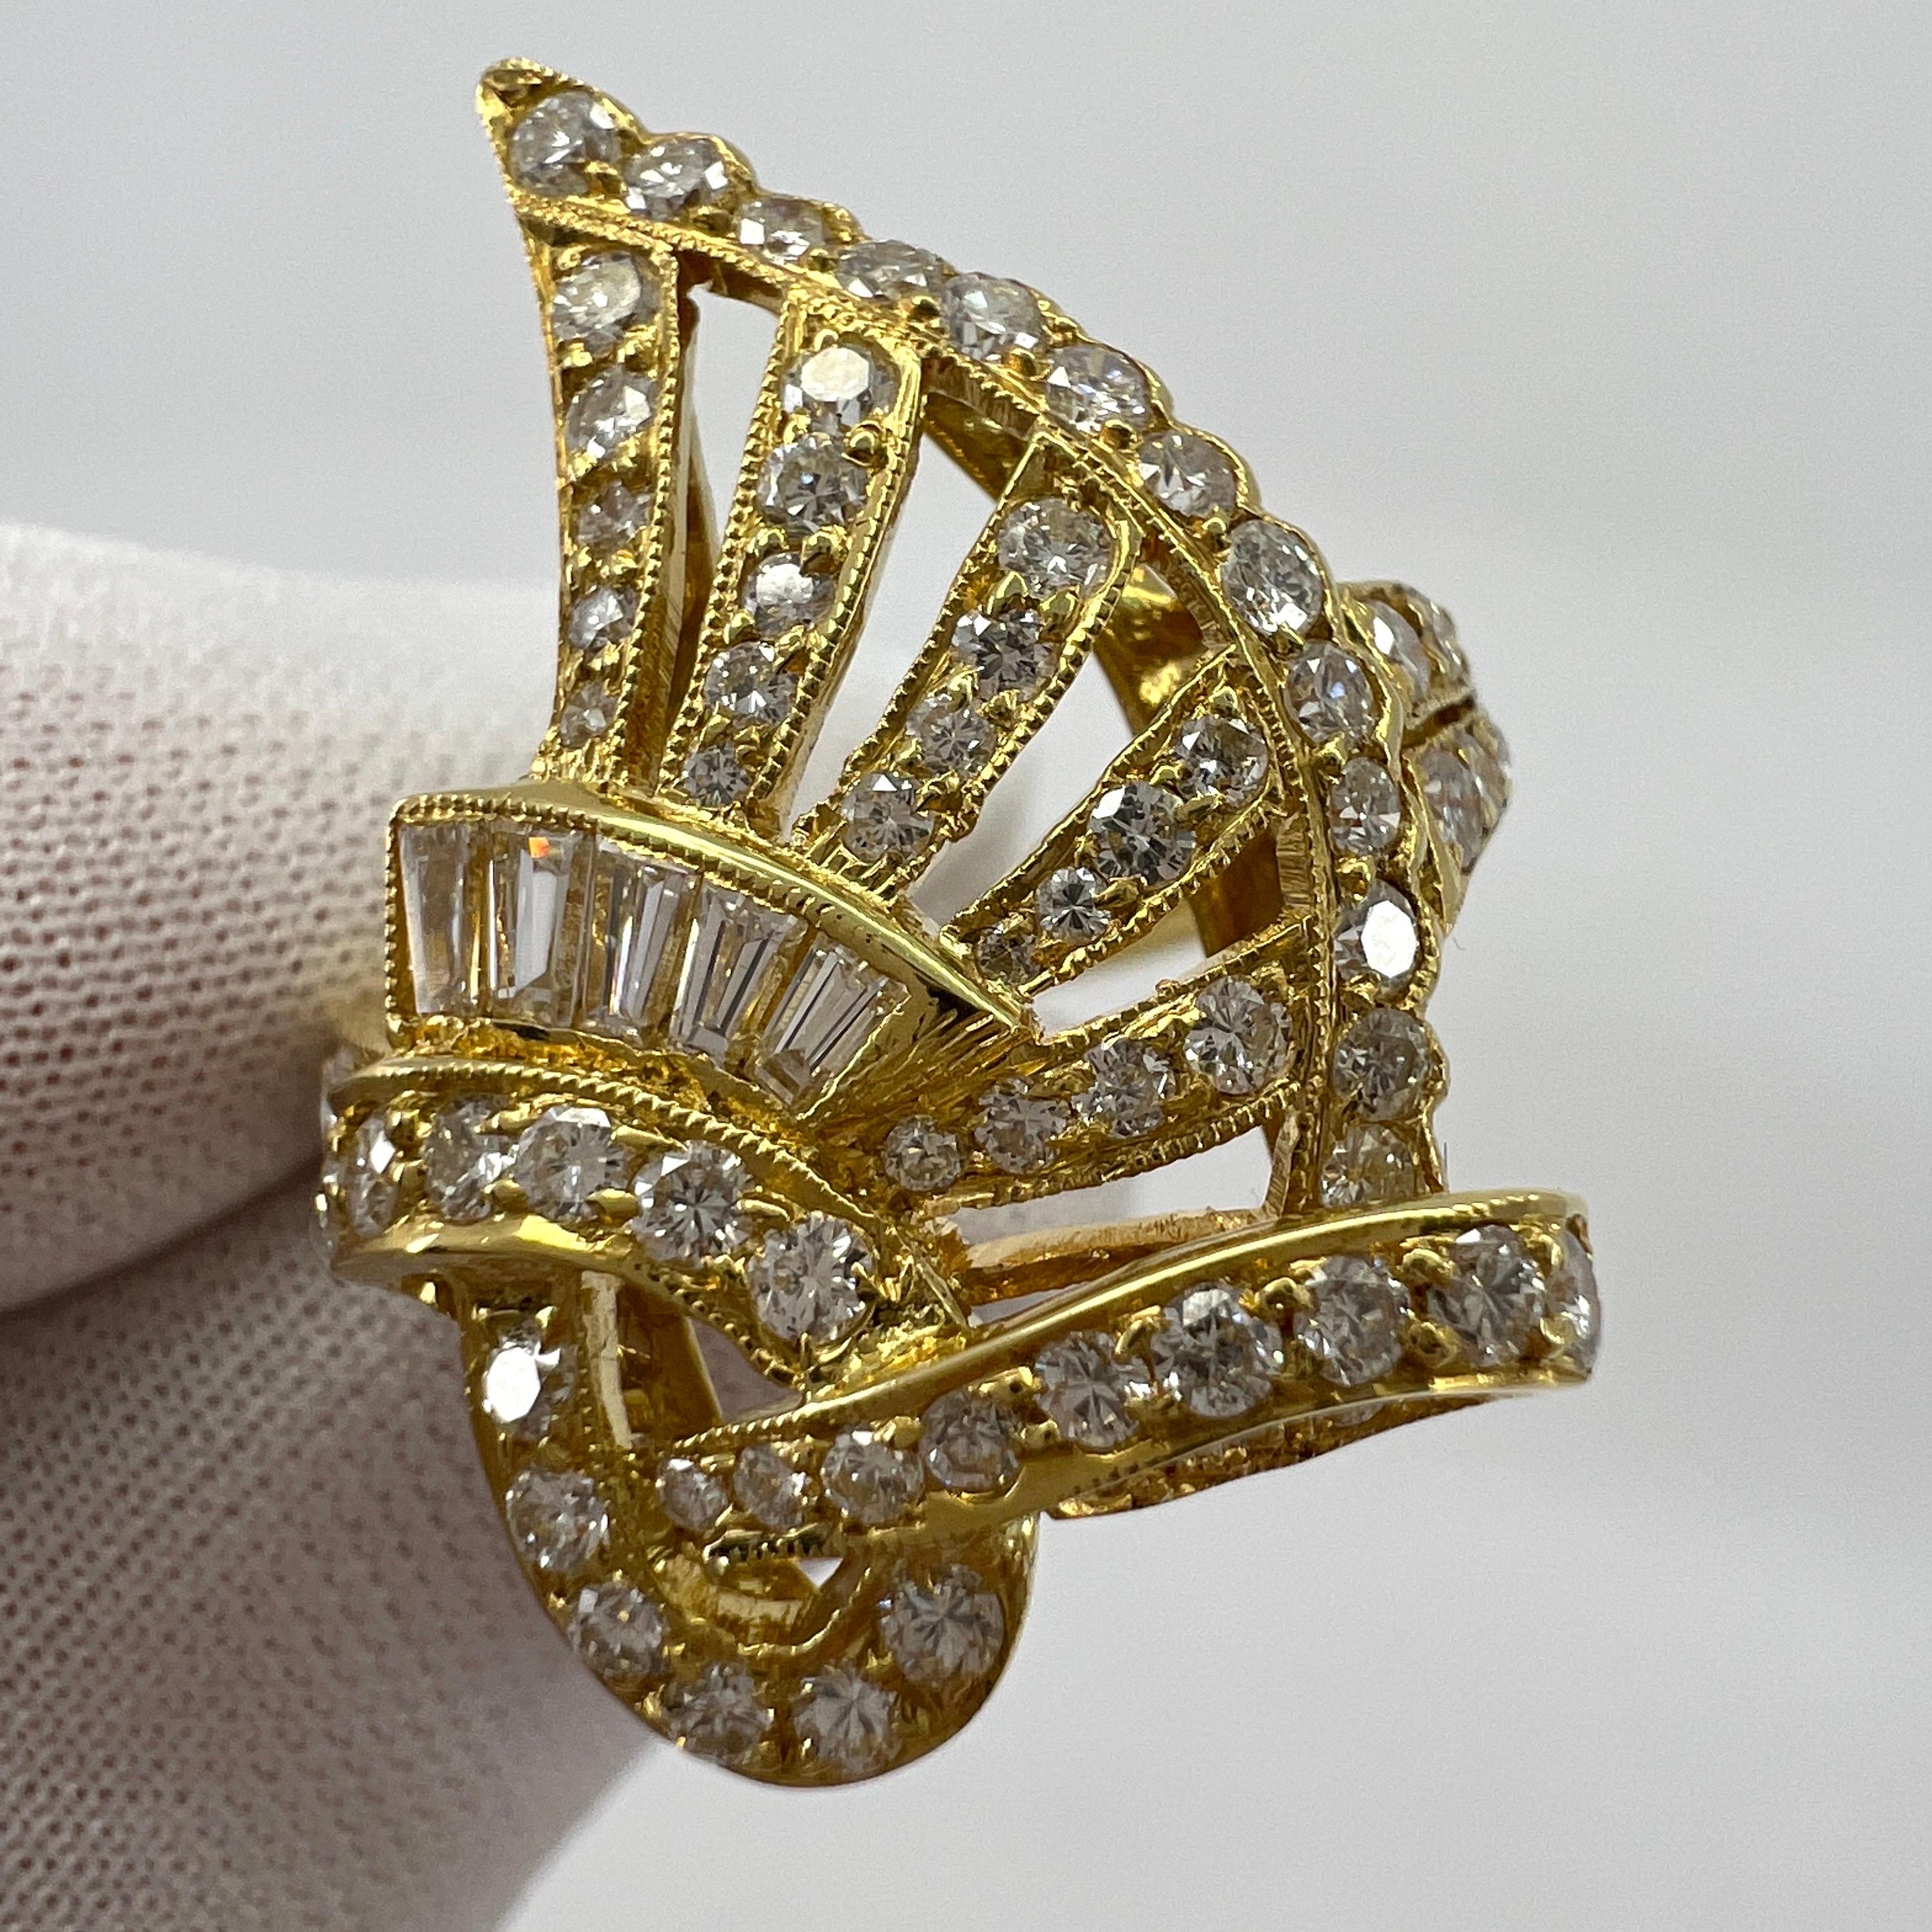 1.26ct Fancy White Diamond Swirl Round & Baguette Cut 18k Gold Statement Ring For Sale 5